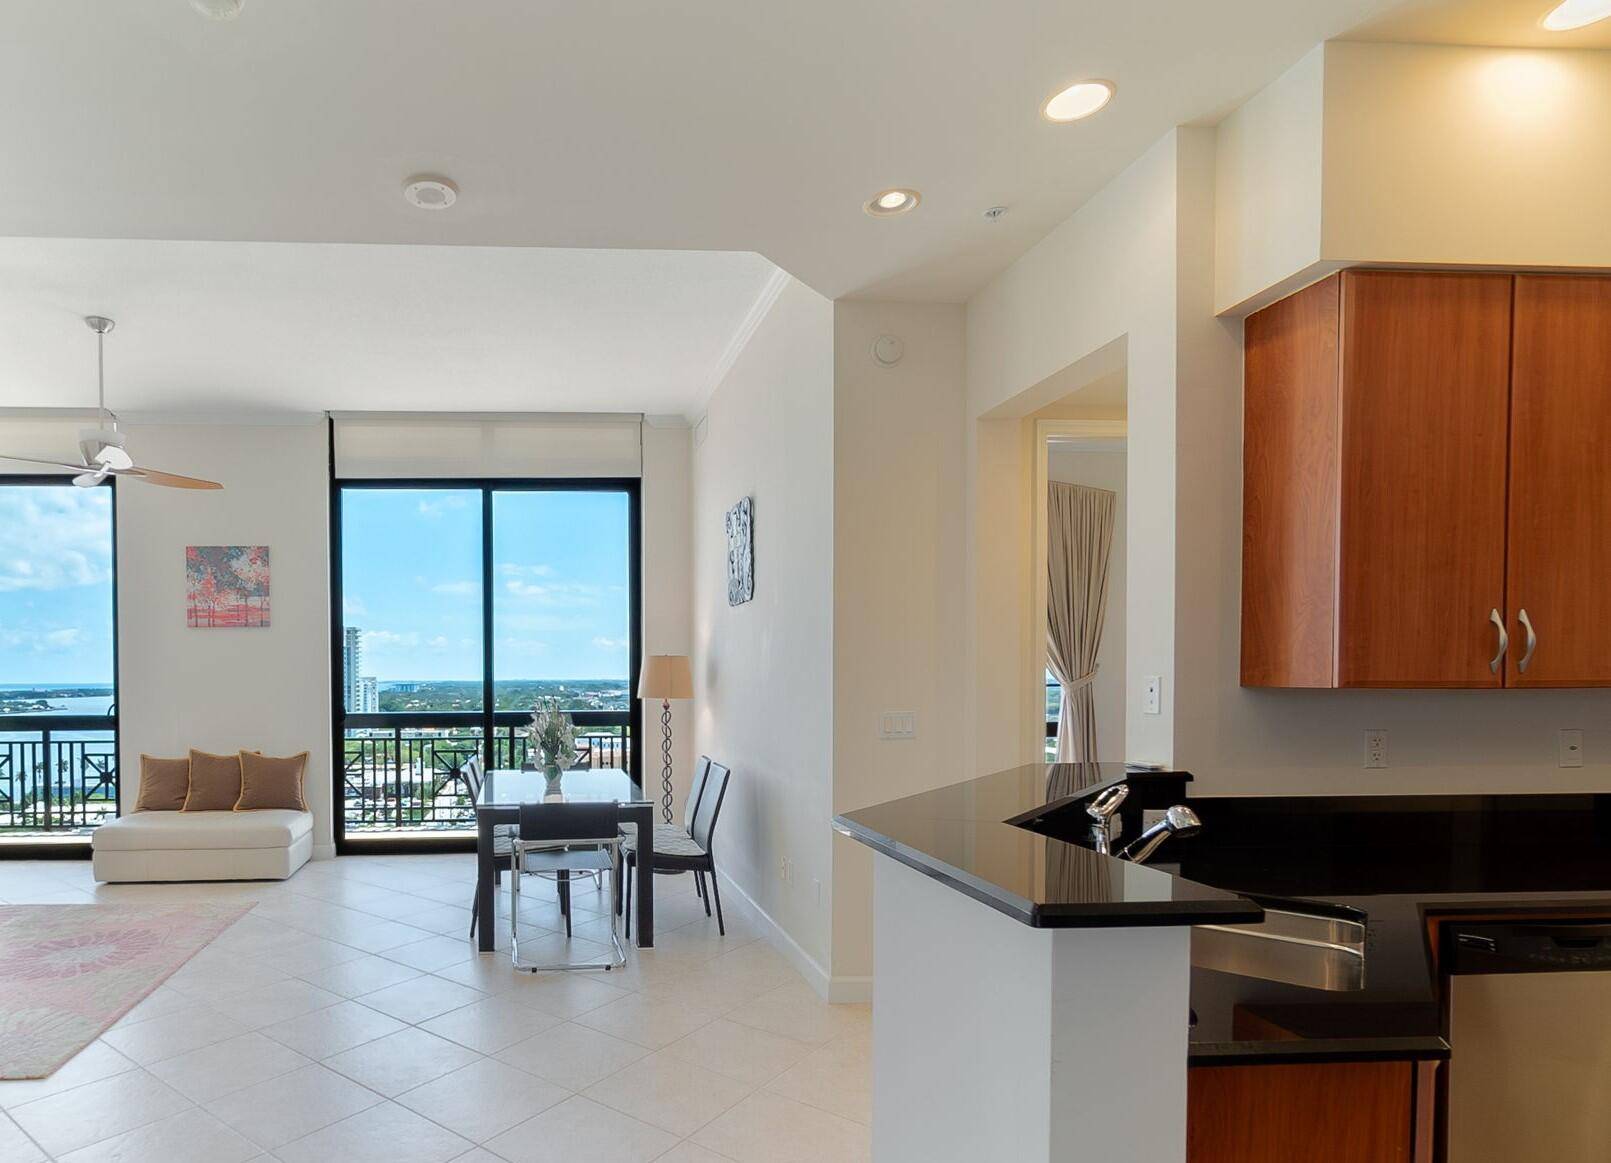 Every time you enter this beautiful penthouse, the expansive, breathtaking view of the intracoastal and undisturbed inland will soothe your mind and spirit.